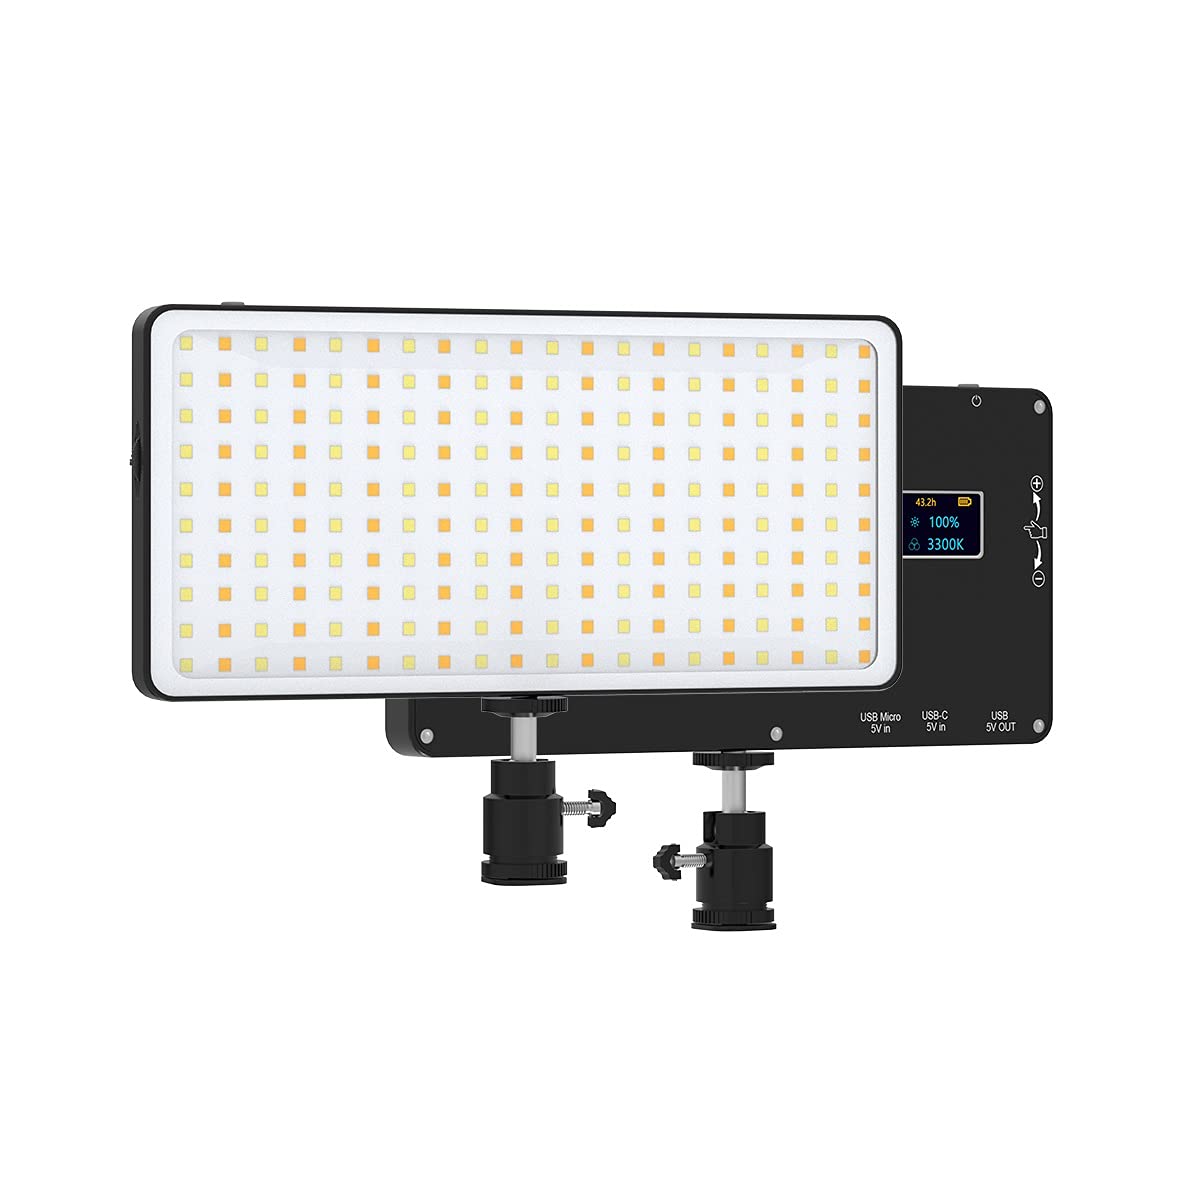 DIGITEK LED-D200 ML Portable LED 10w Video Light with 4200 Mah Battery | Dual Color Temperature | OLED Screen Display | Brightness Control | Built-in Battery & Input-Output Port for Charging